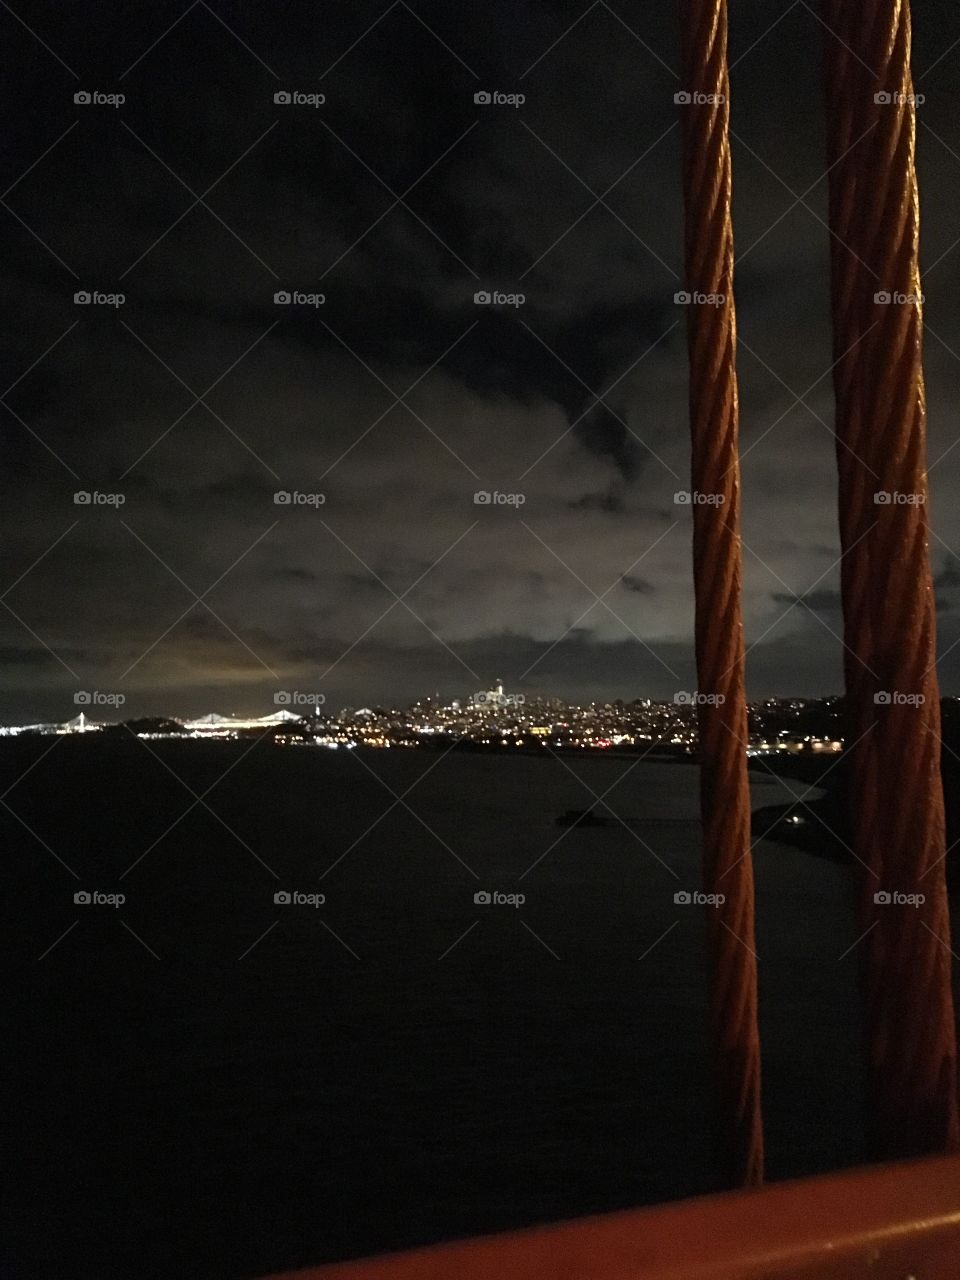 Lights of San Francisco at night from the Golden Gate Bridge, with the bay bridge lit up in the distance